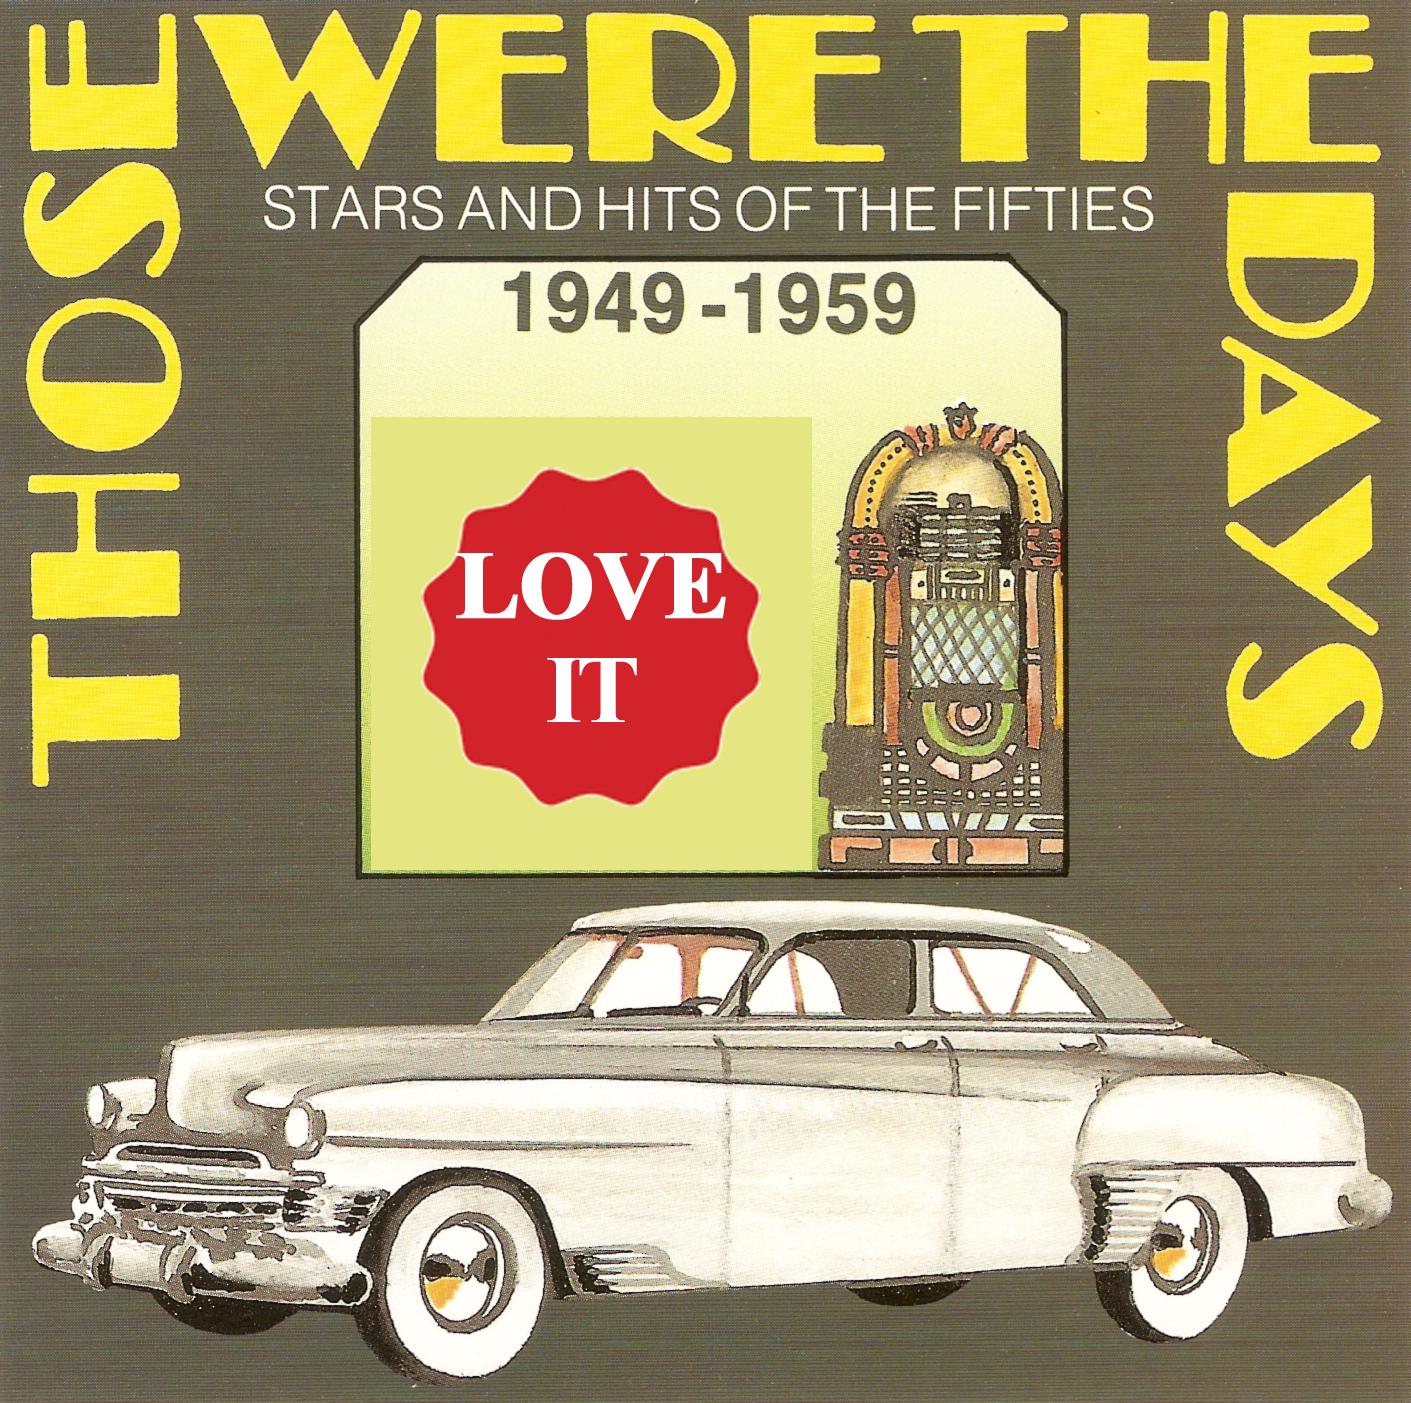 Those Were the Days (Stars and Hits of the Fifties)